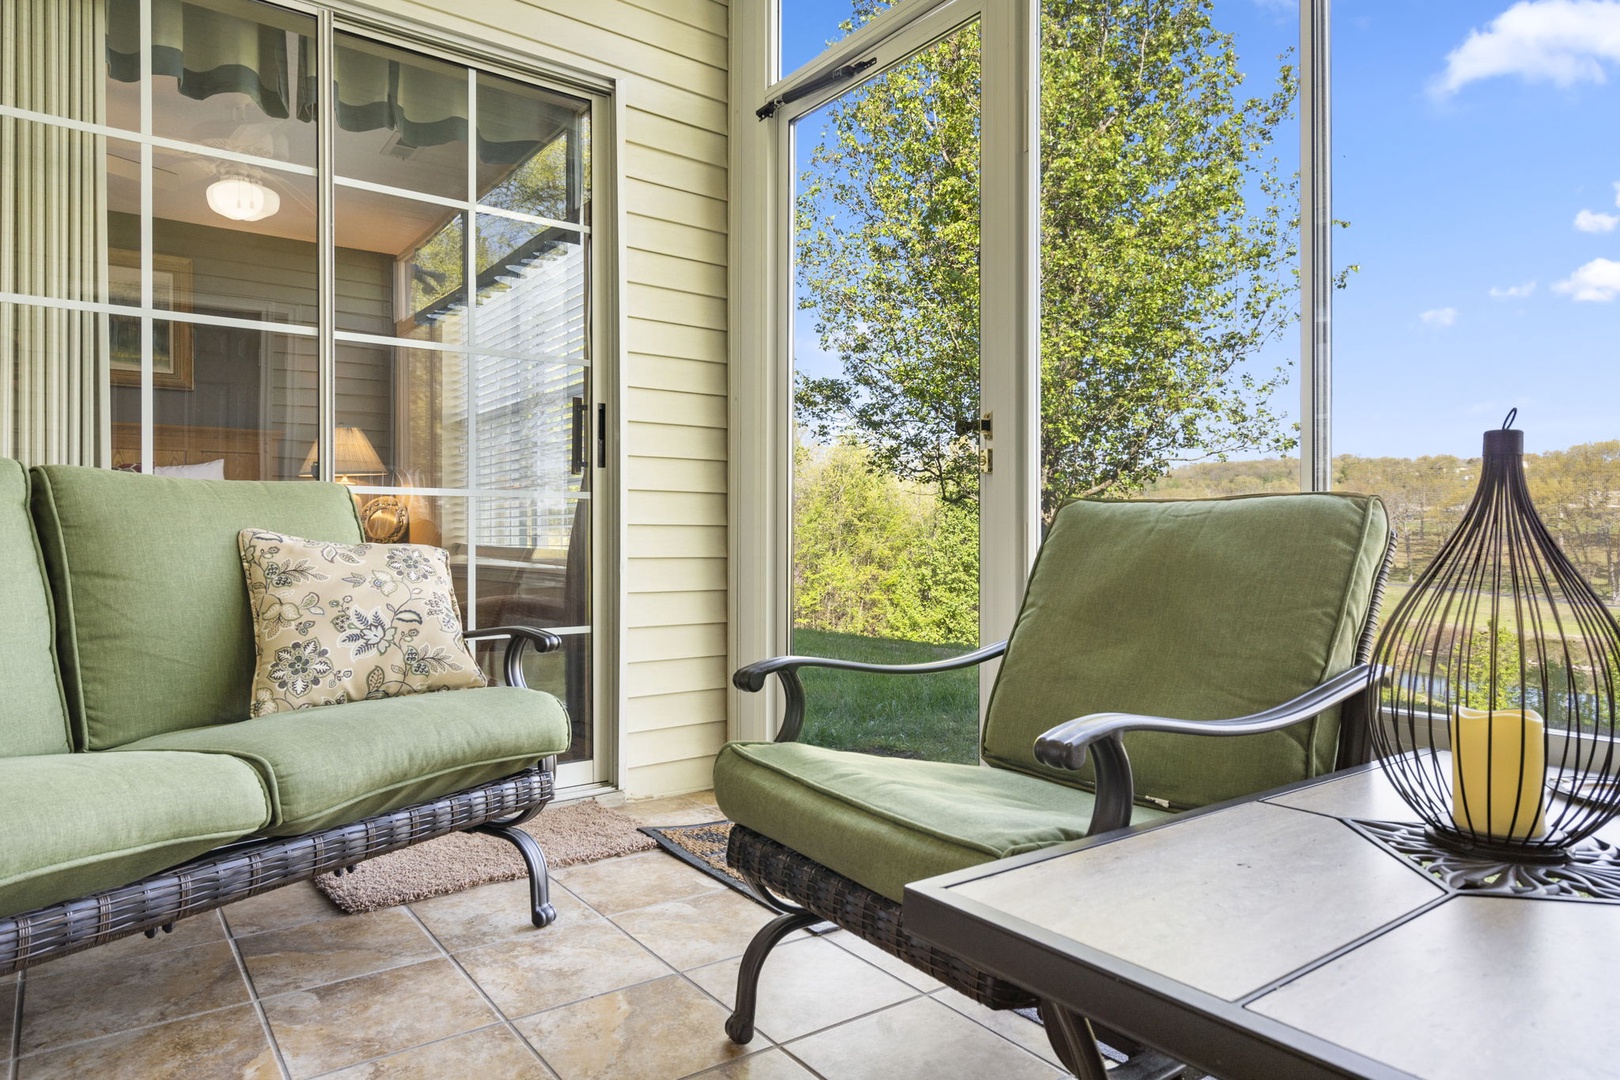 Take in the fresh air and gorgeous views while enjoying comfortable patio seating